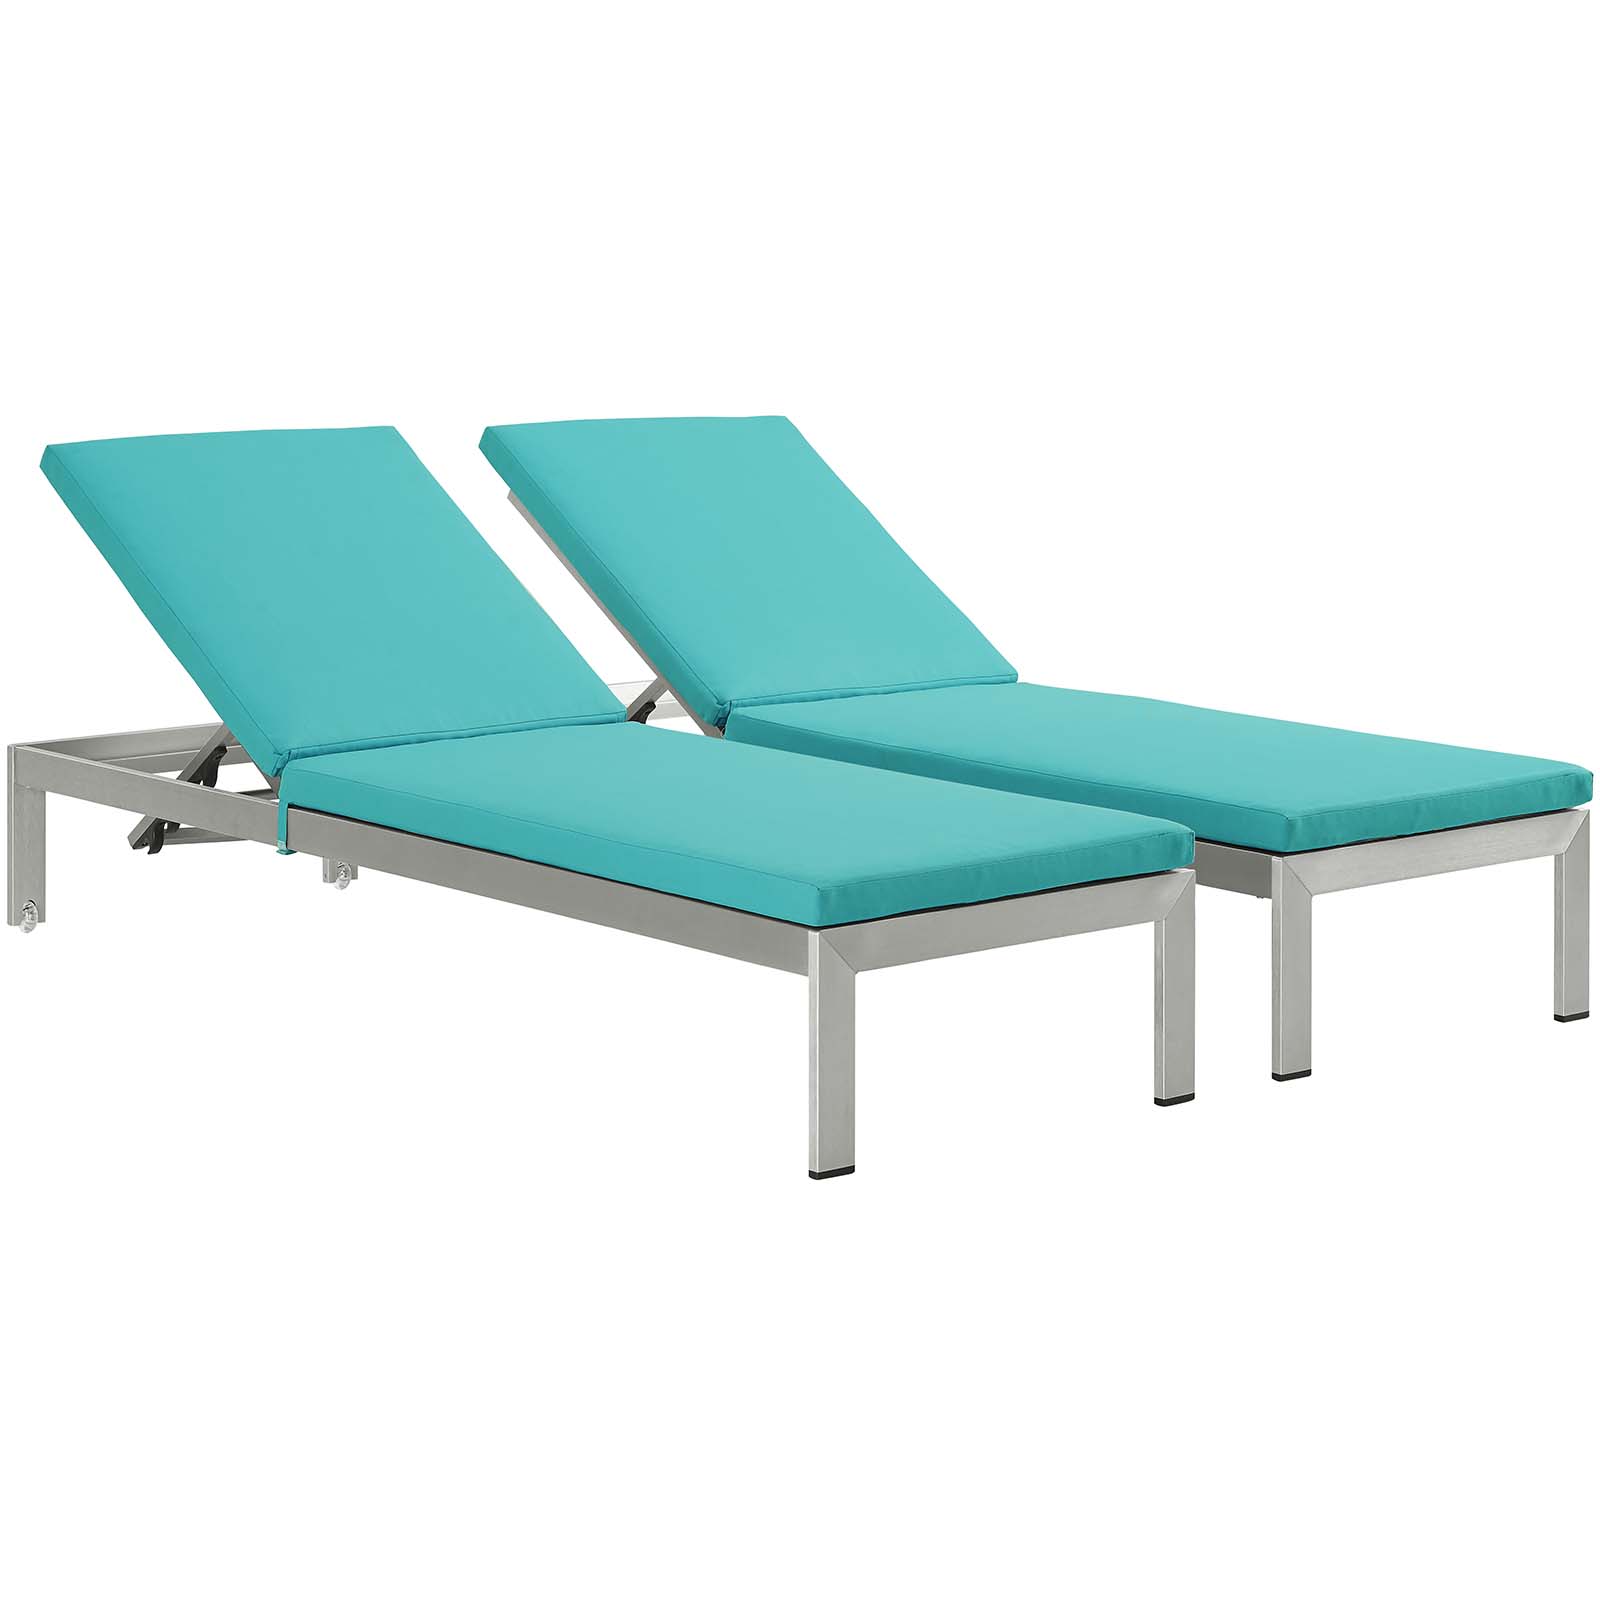 Modern Contemporary Urban Design Outdoor Patio Balcony Chaise Lounge Chair ( Set of 2), Blue, Aluminum - image 1 of 6